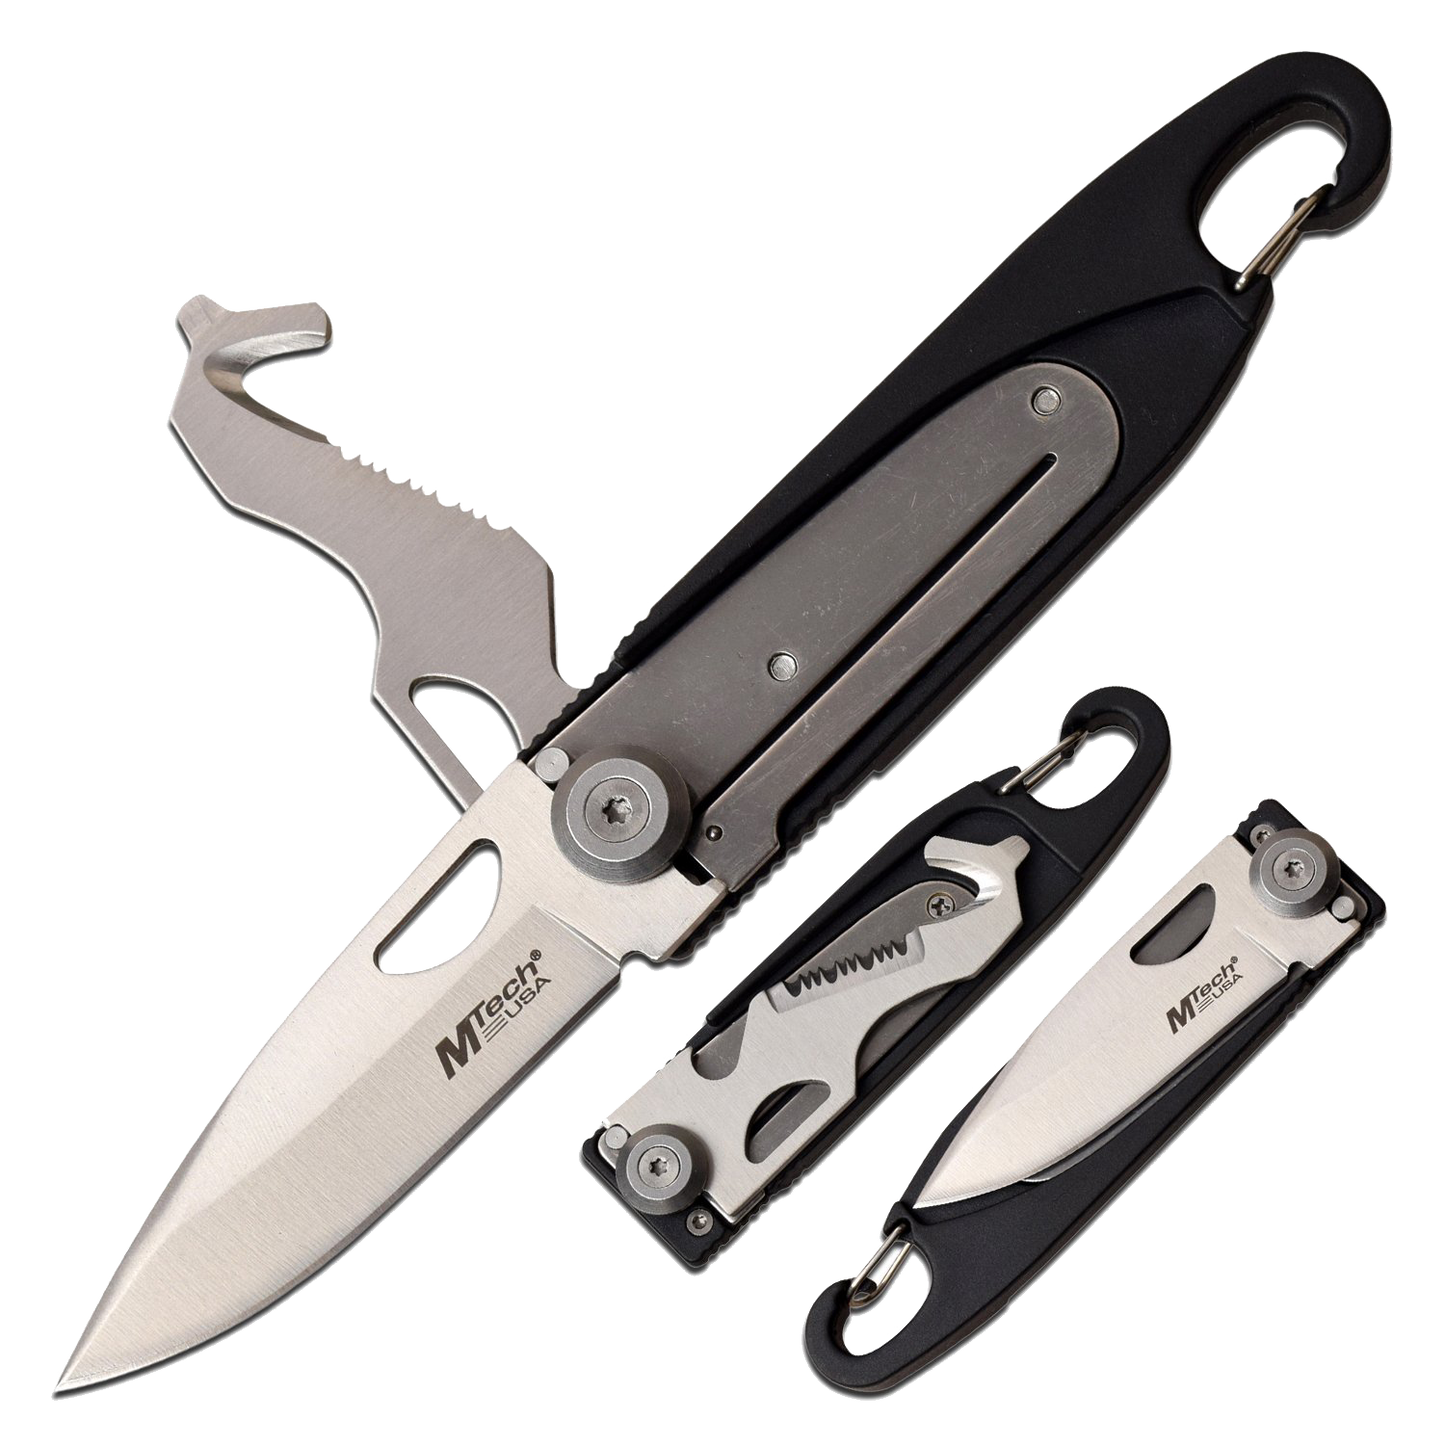 Mtech Mtech Drop Point Multi-Tools Folding Knife - 6.5 Inches Overall #mt-1102Bk Dim Gray